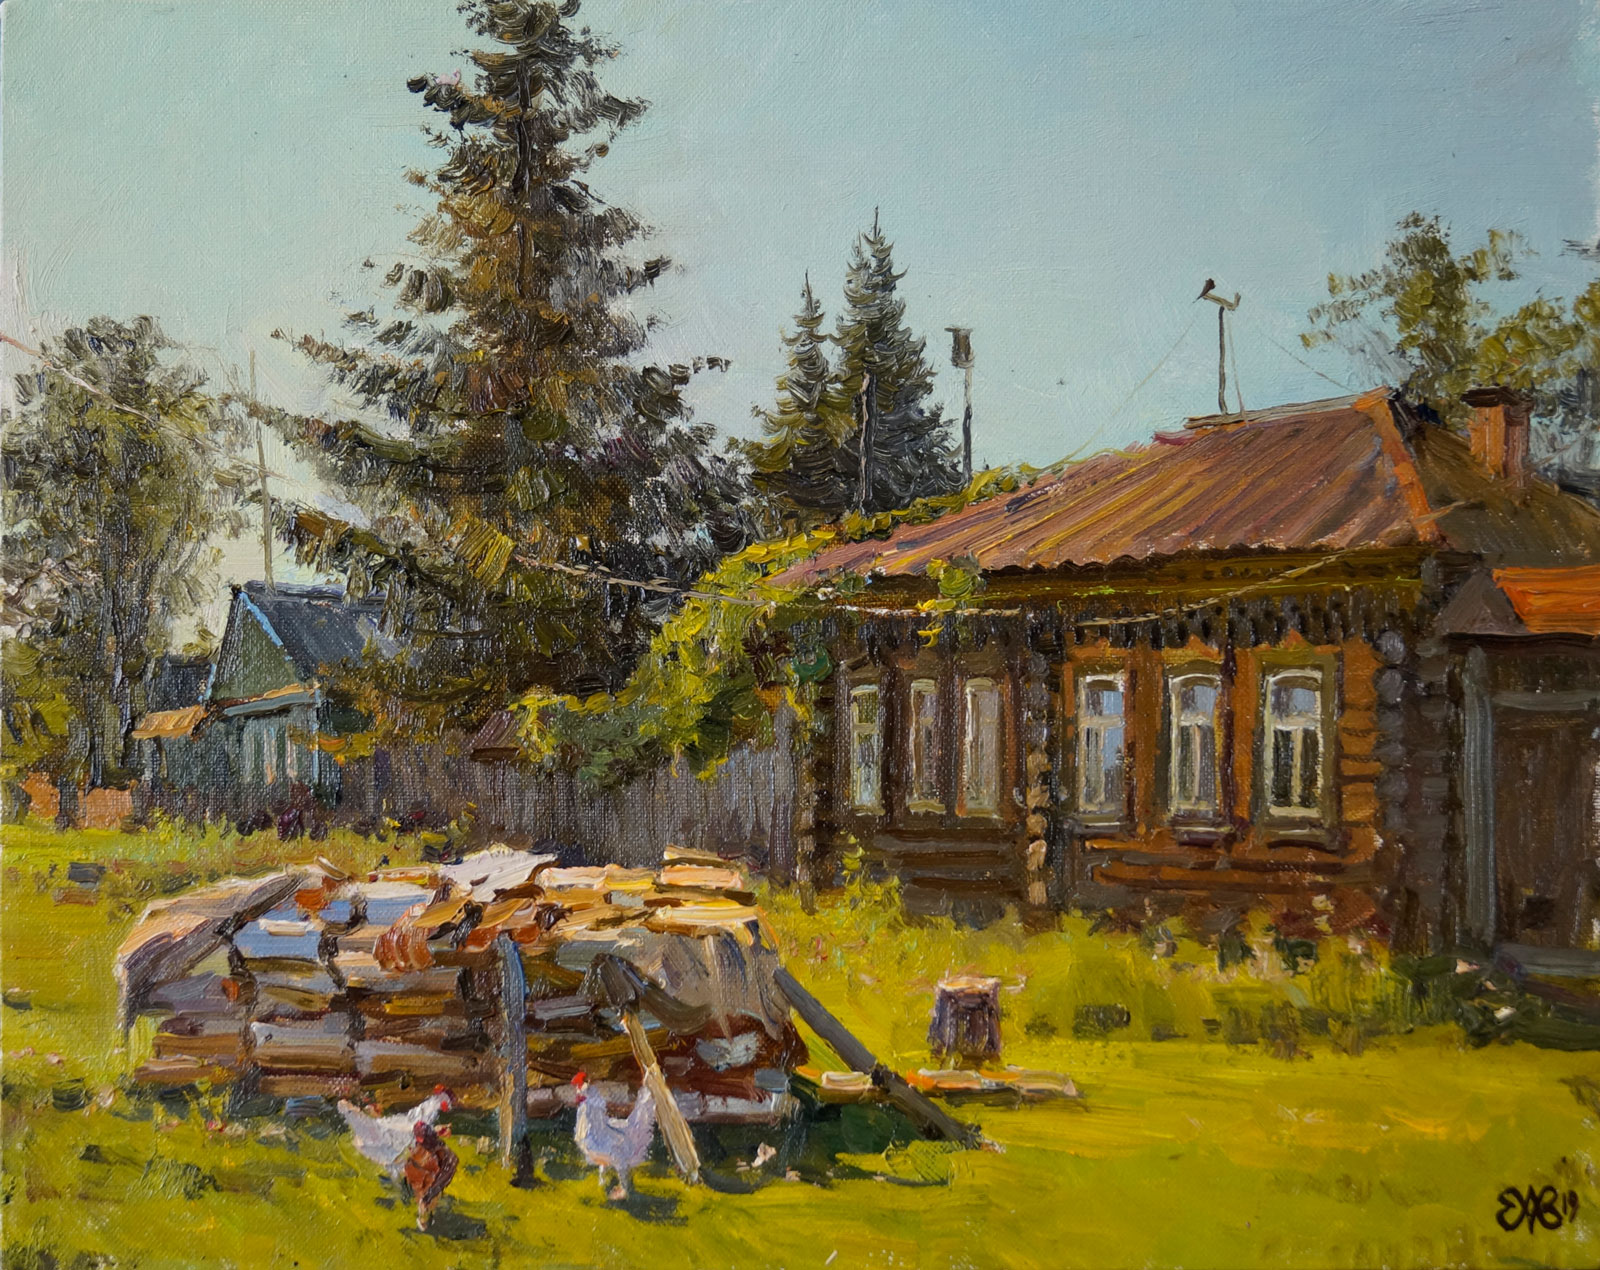 Firewood For Winter, Alexey Efremov, Buy the painting Oil